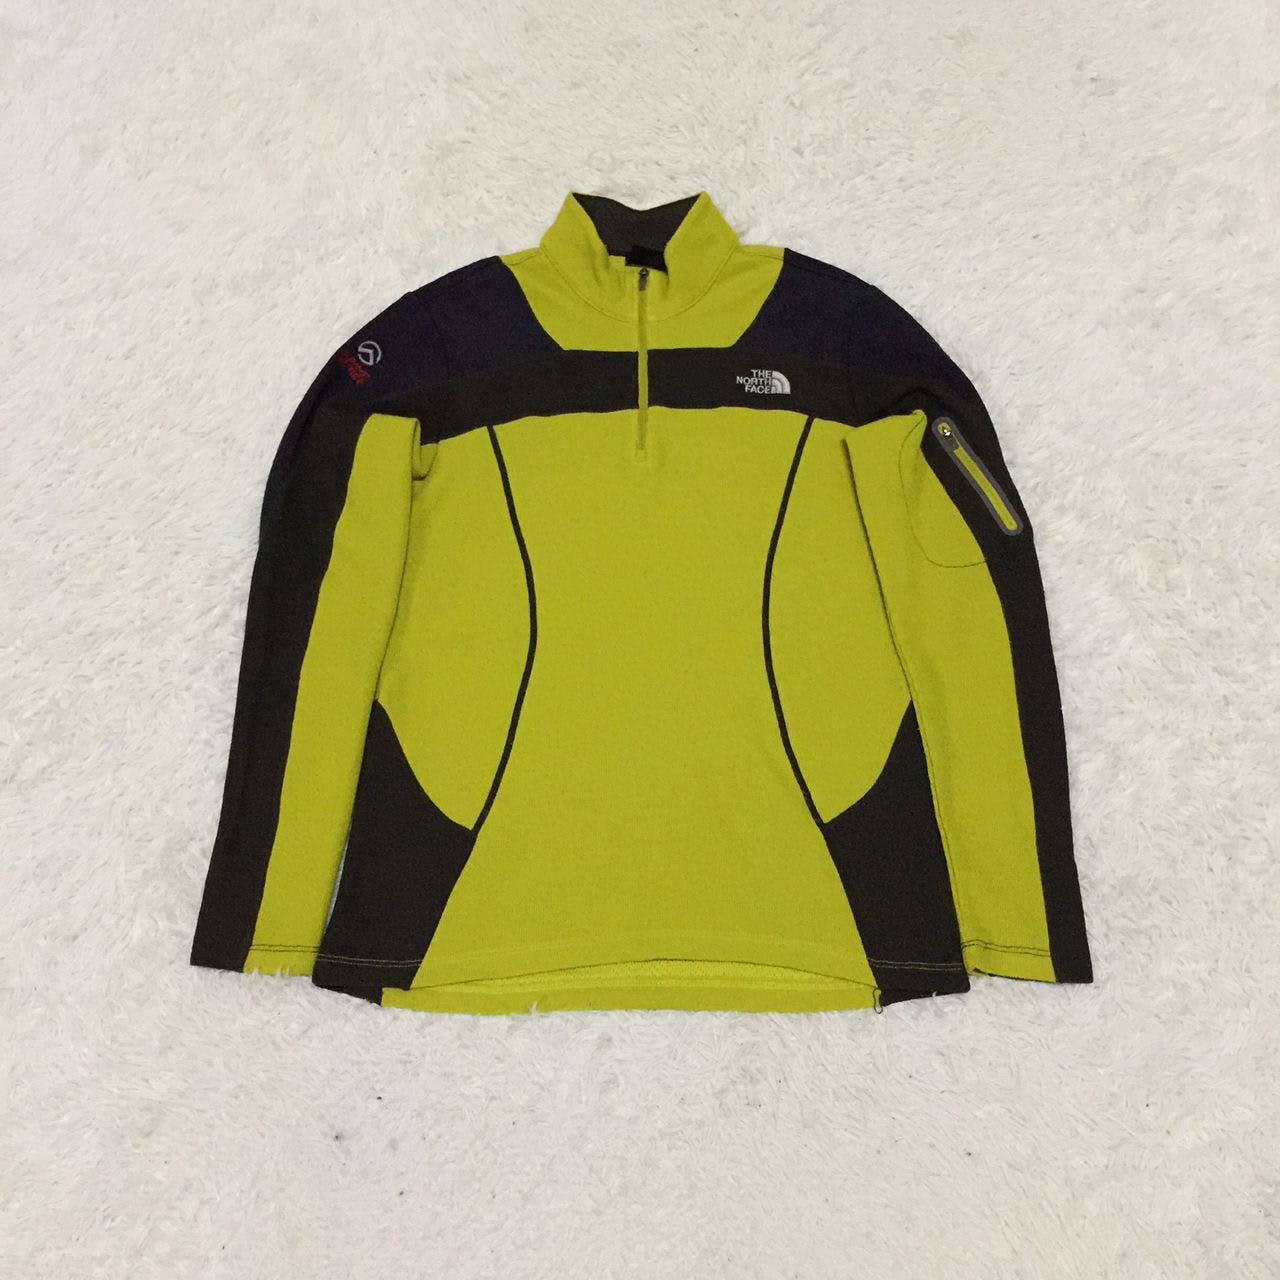 Vintage The North Face Sweater - 11